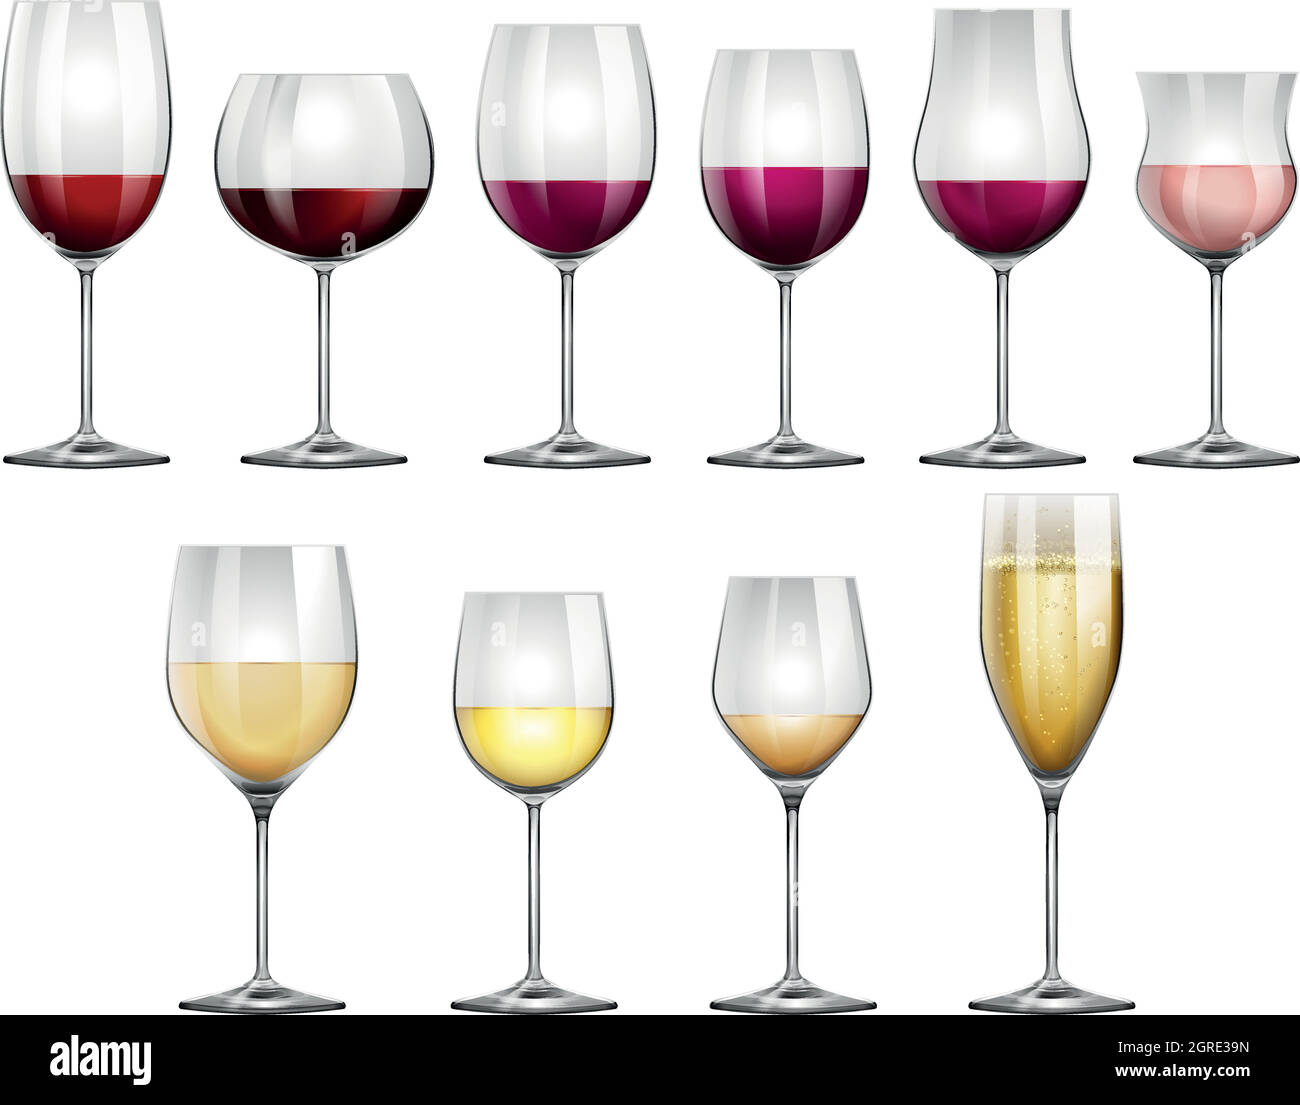 Wine glasses filled with red and white wine Stock Vector